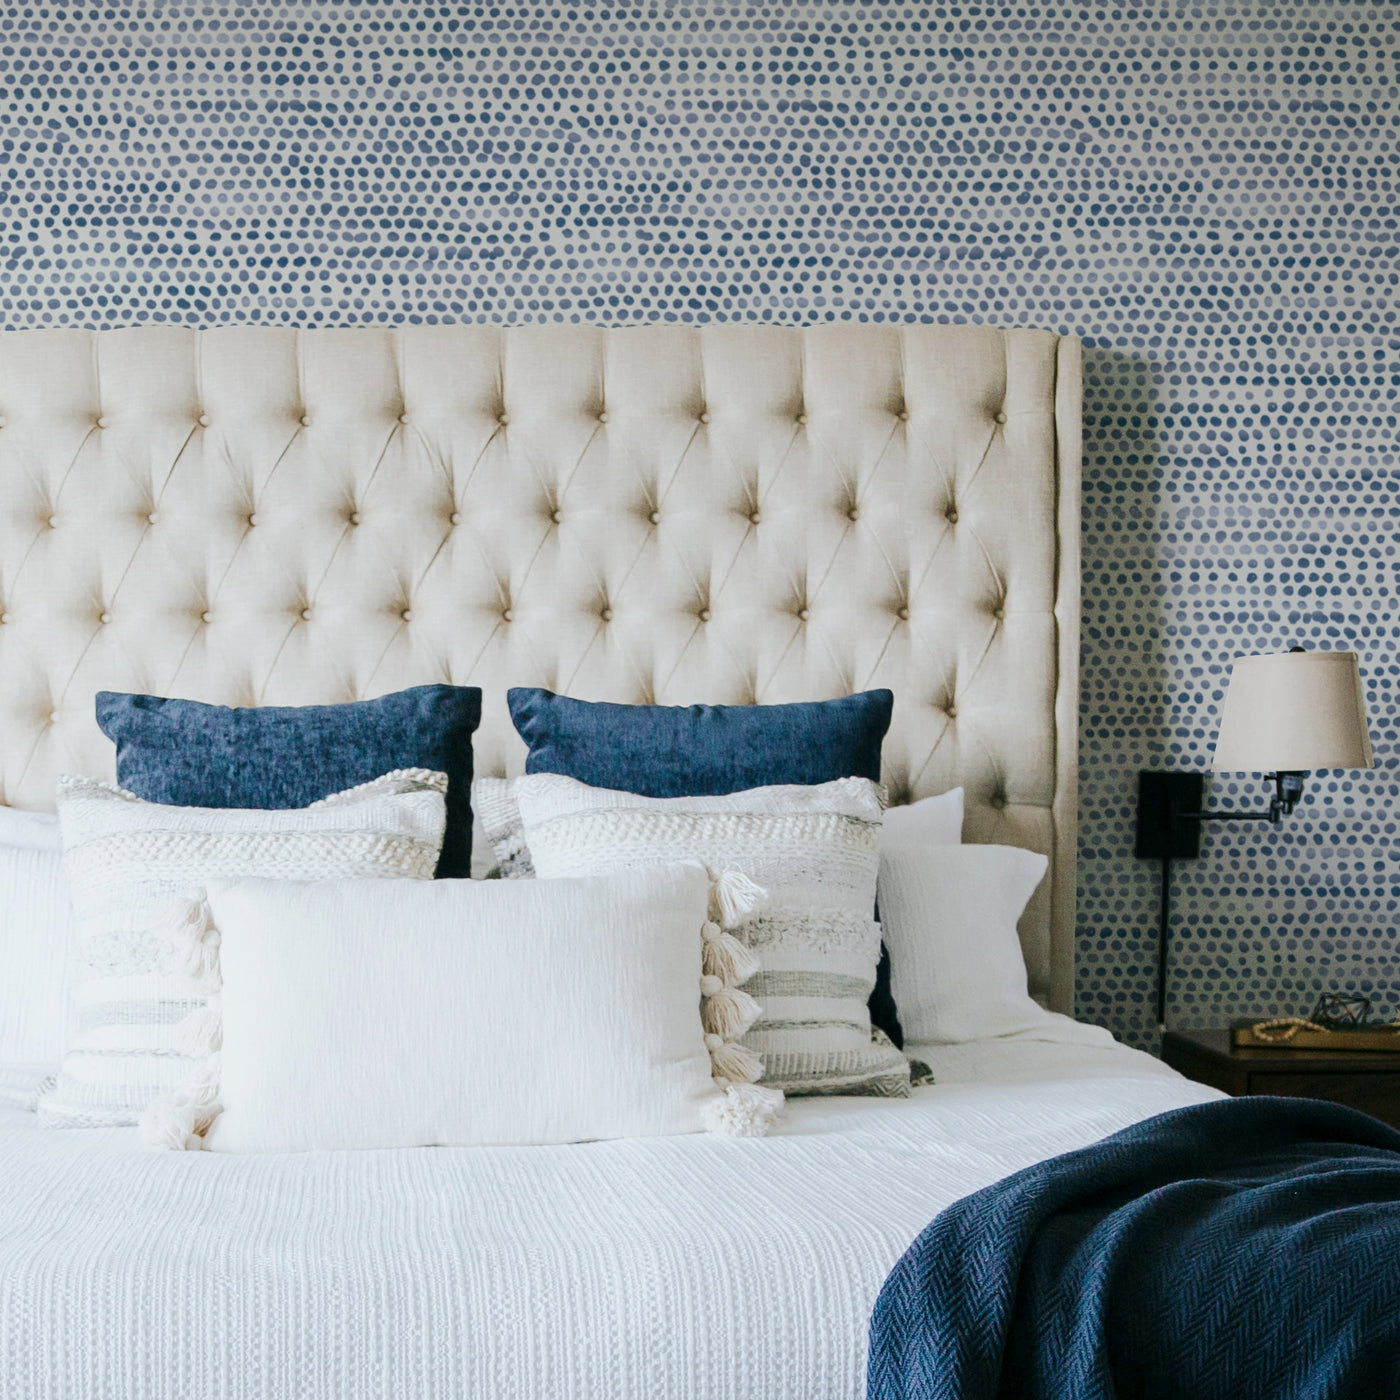 Moire Dots Removable Wallpaper - A bed with a tan headboard in front of a wall featuring Tempaper's Moire Dots Peel And Stick Wallpaper in blue moon dots | Tempaper#color_blue-moon-dots